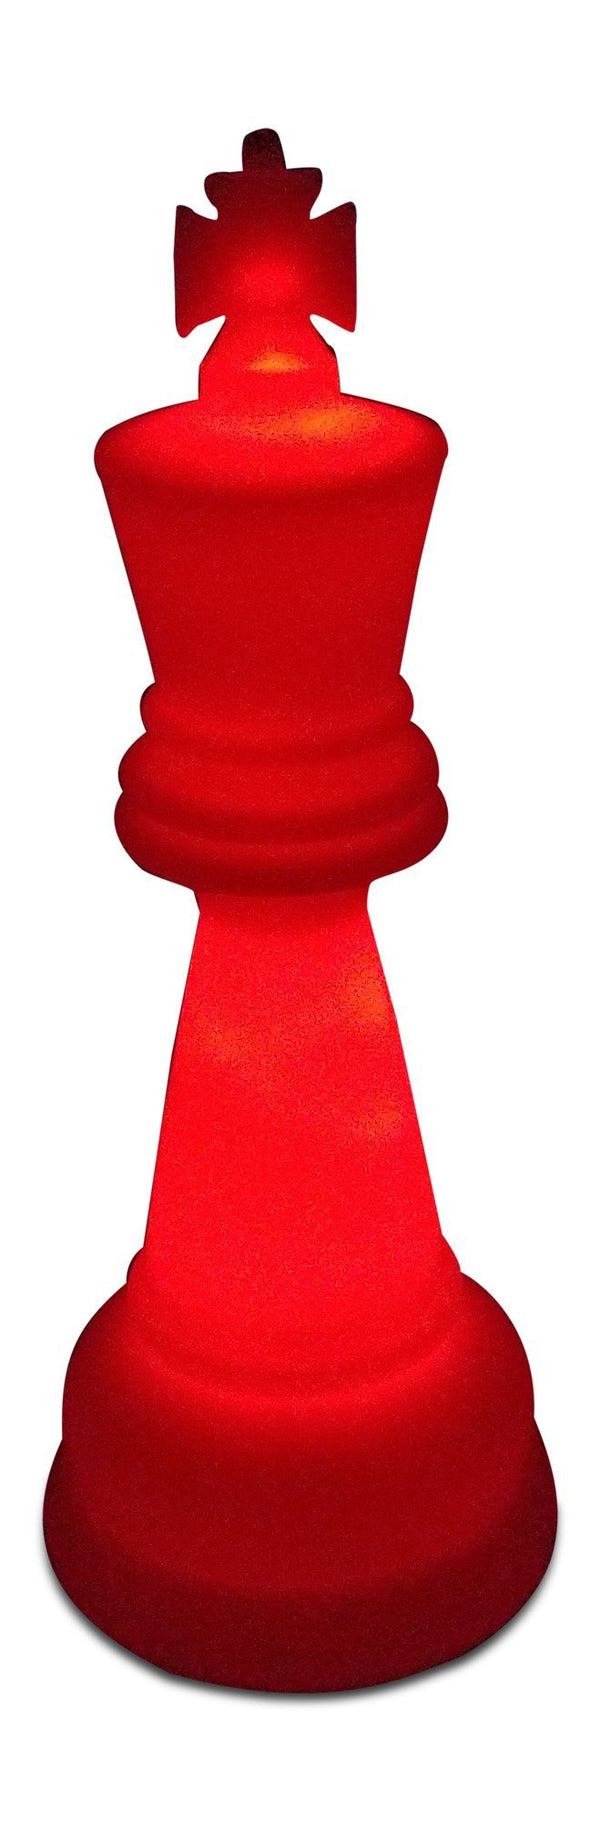 MegaChess 26 Inch Perfect King Light-Up Giant Chess Piece - Red |  | MegaChess.com